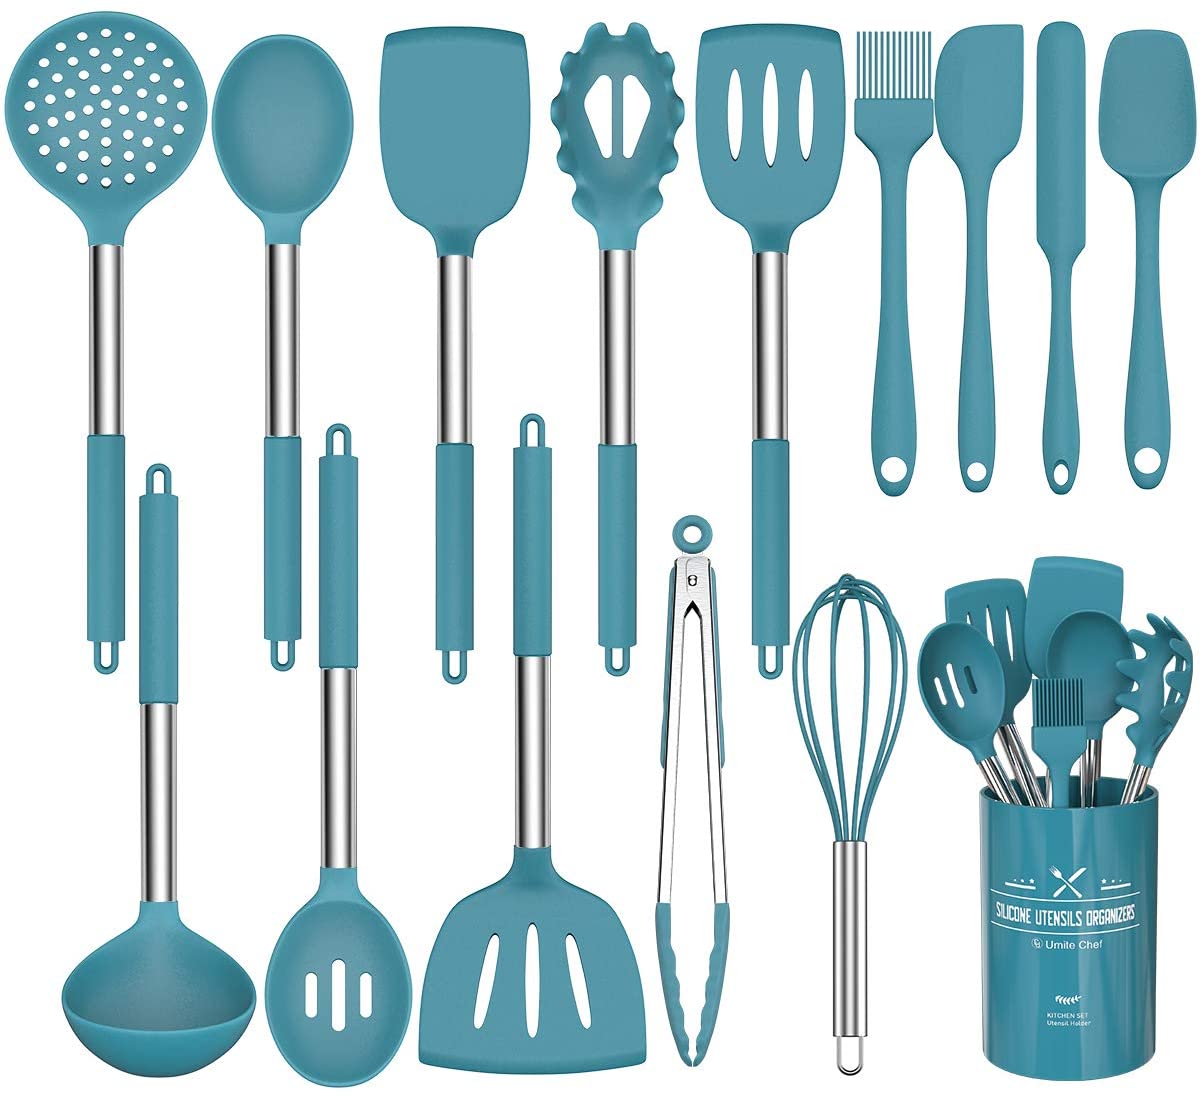 How to Choose the Best Set of Kitchen Tools in 2020